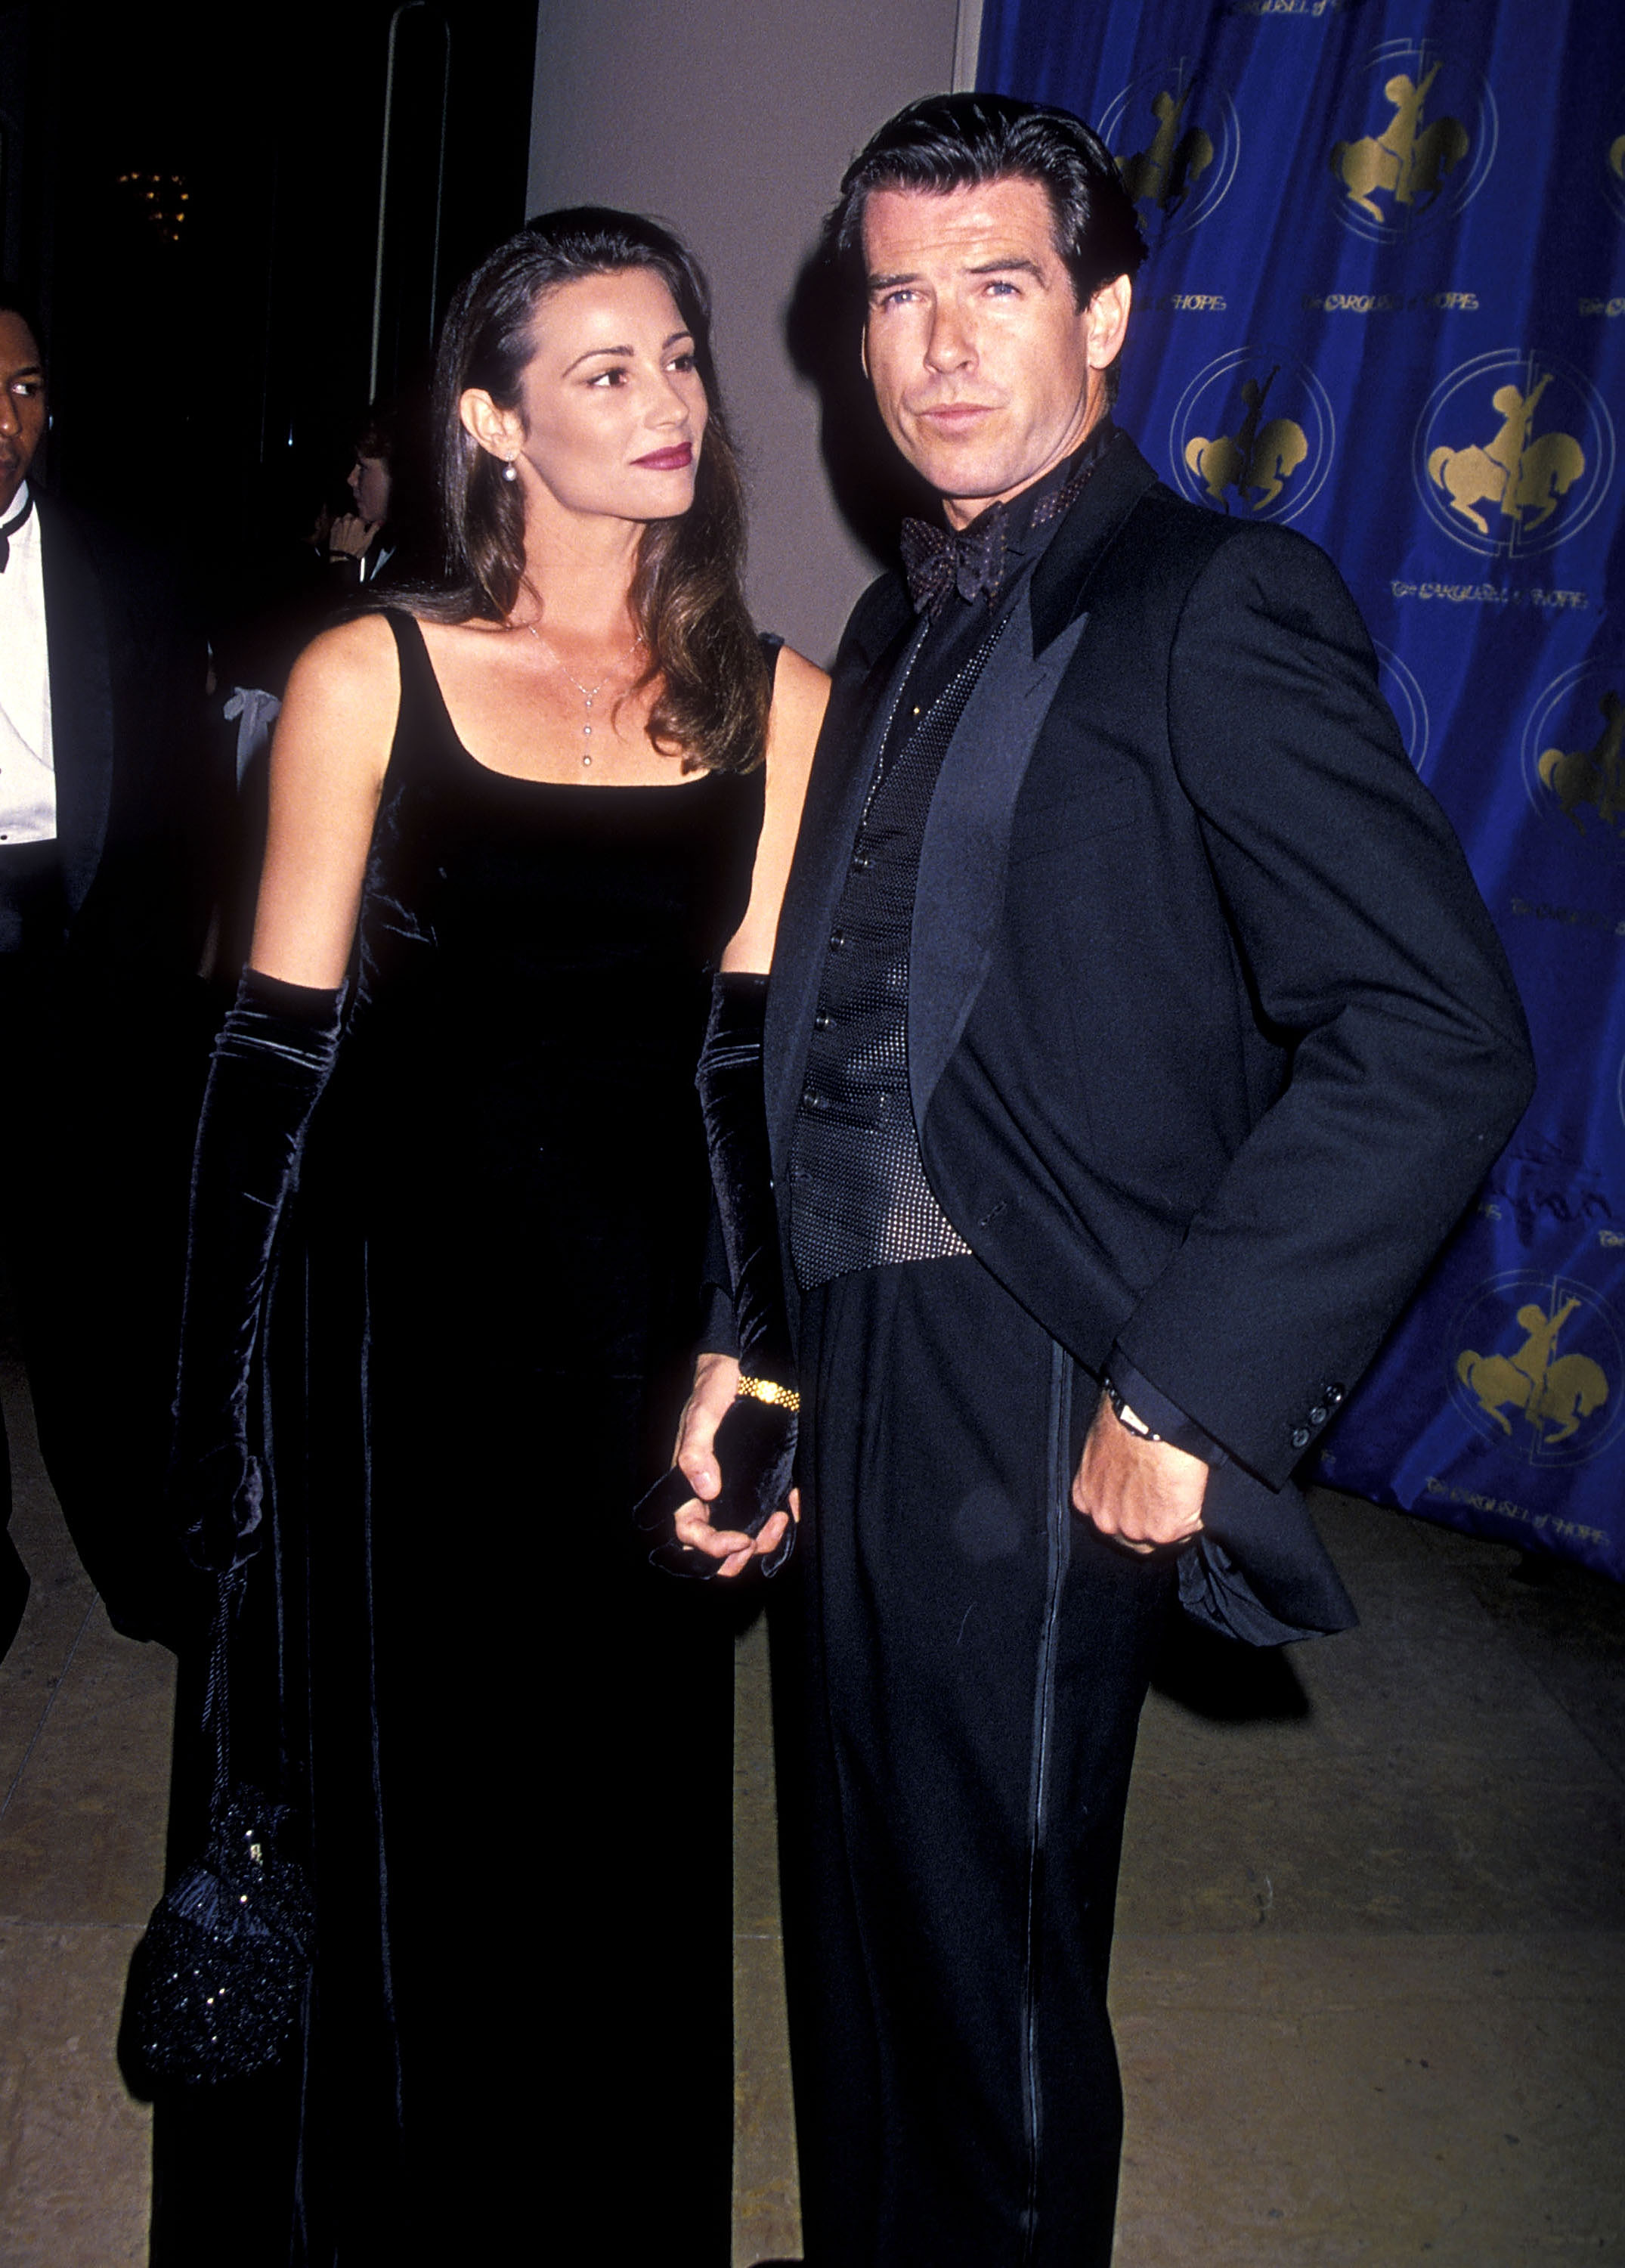 Pierce Brosnan and girlfriend Keely Shaye Smith attend the "Carousel of Hope" Ball to Benefit the Barbara Davis Center for Childhood Diabetes on October 28, 1994 at the Beverly Hilton Hotel in Beverly Hills, California. | Source: Getty Images